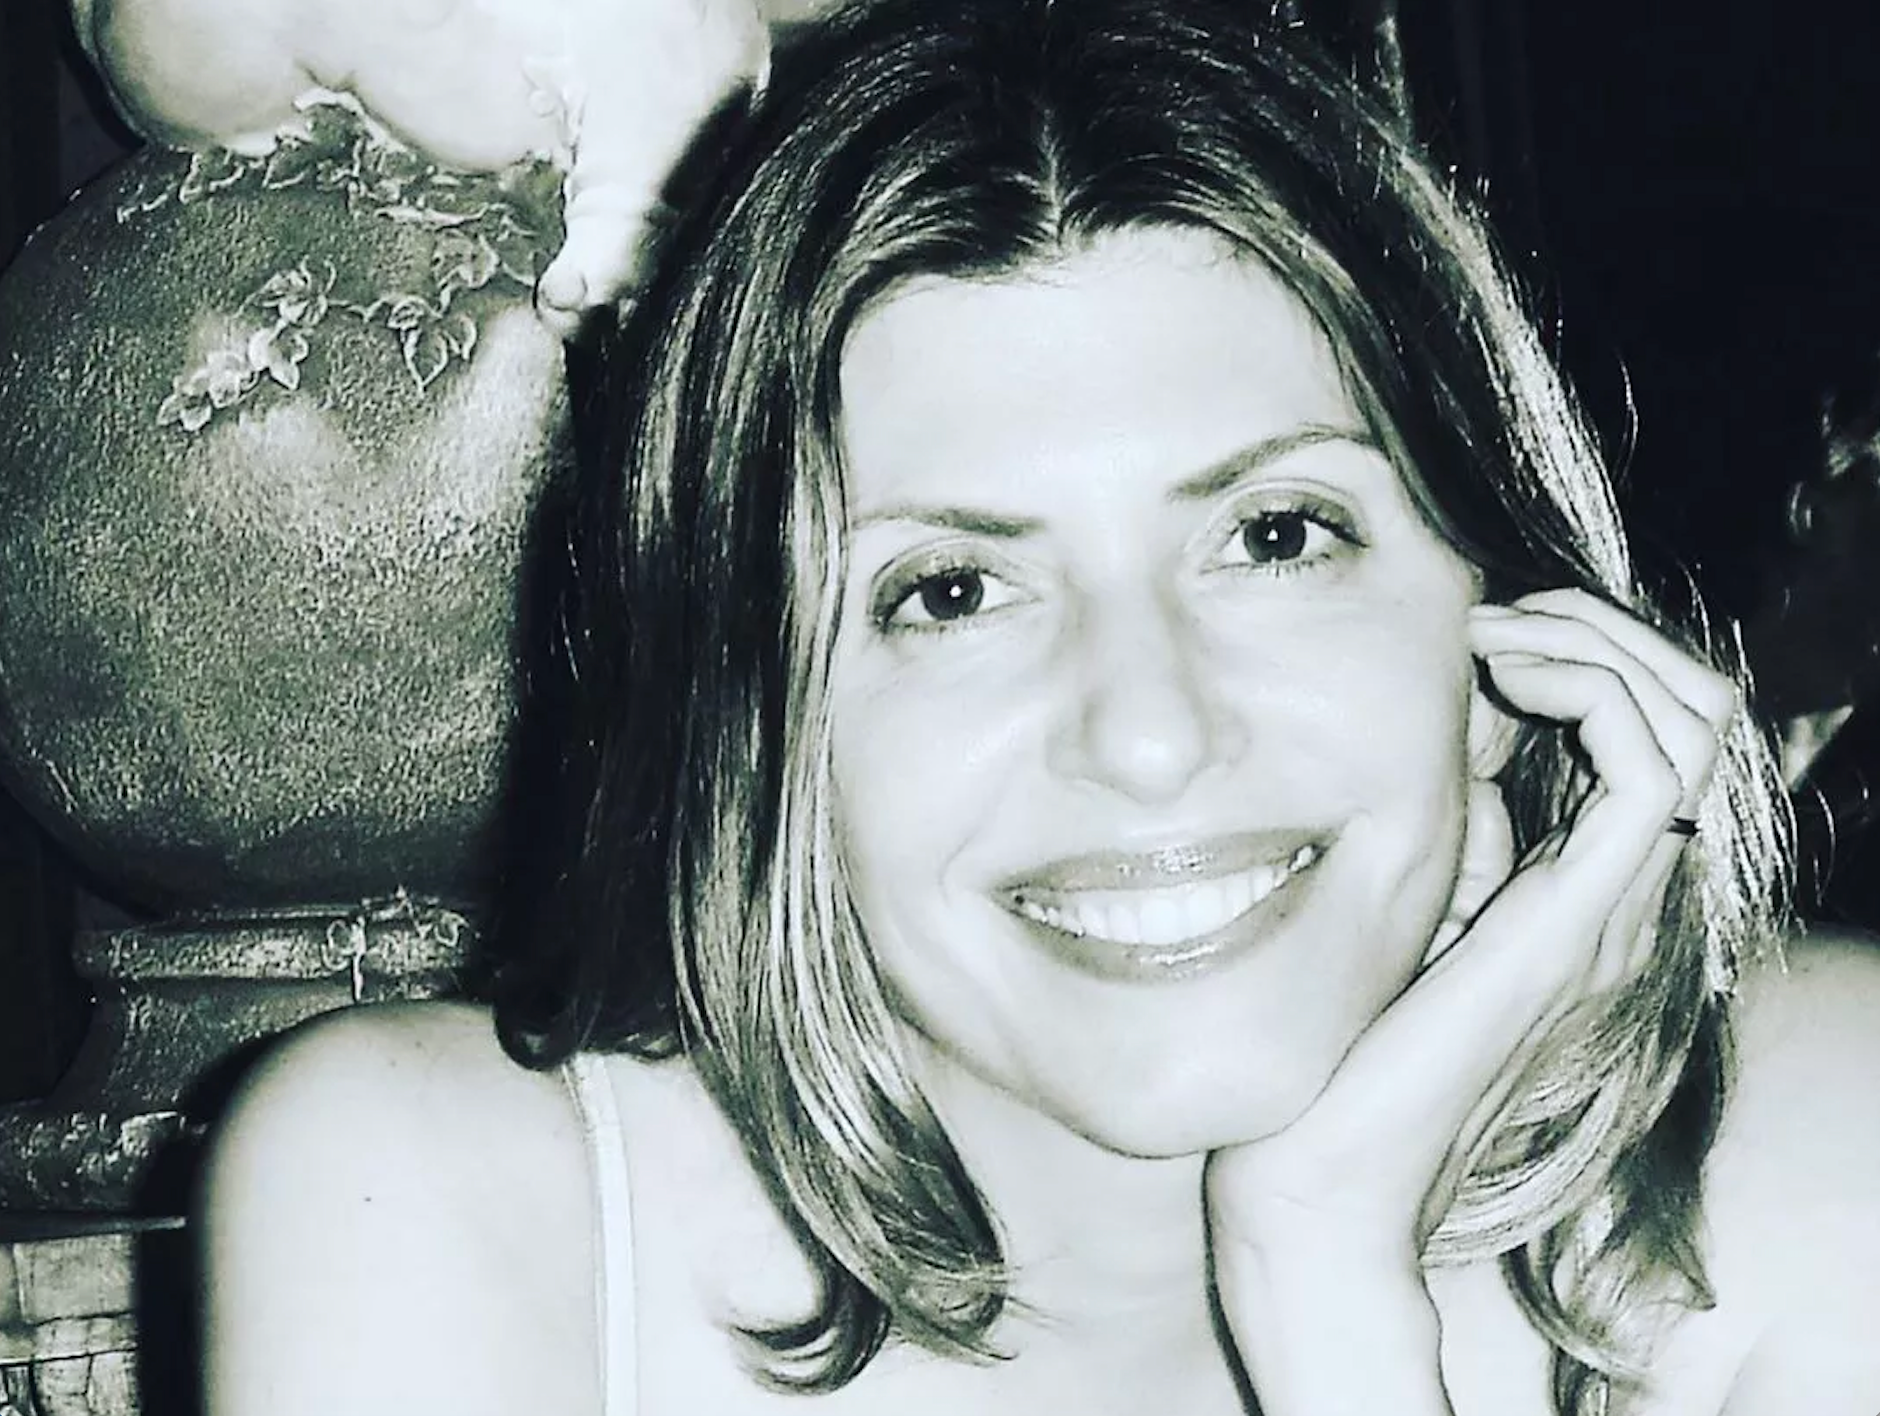 Jennifer Dulos, 50, was last seen on 24 May 2019 after dropping her children off at school